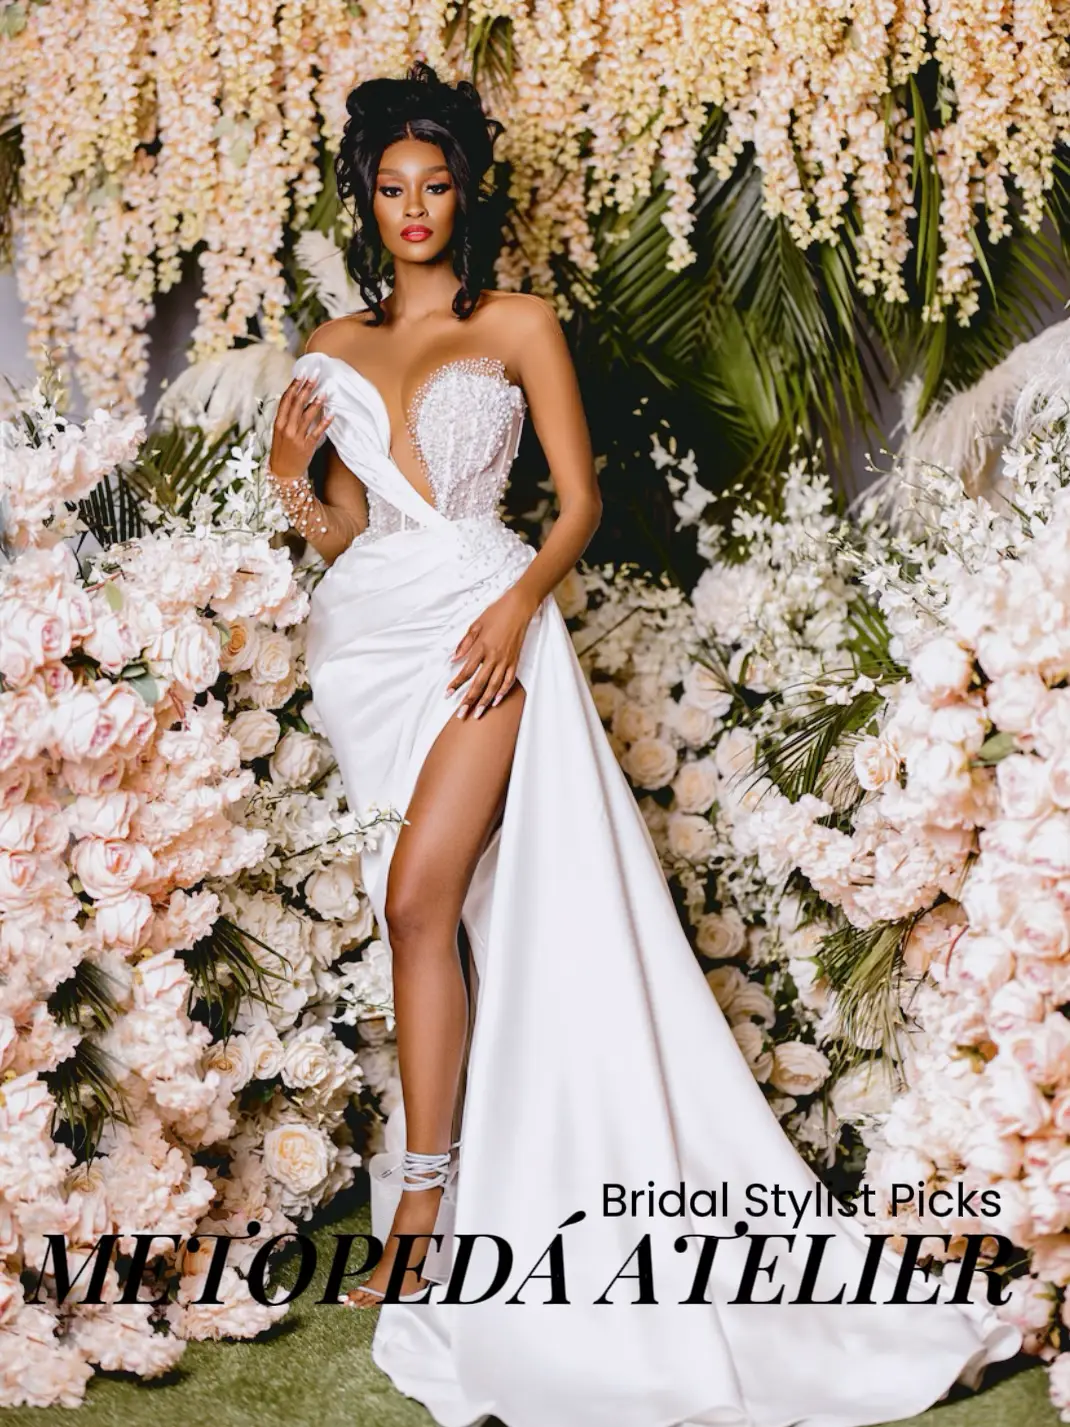 The Most Gorgeous Celebrity Bridal Showers and Bachelorette Parties - Galia  Lahav